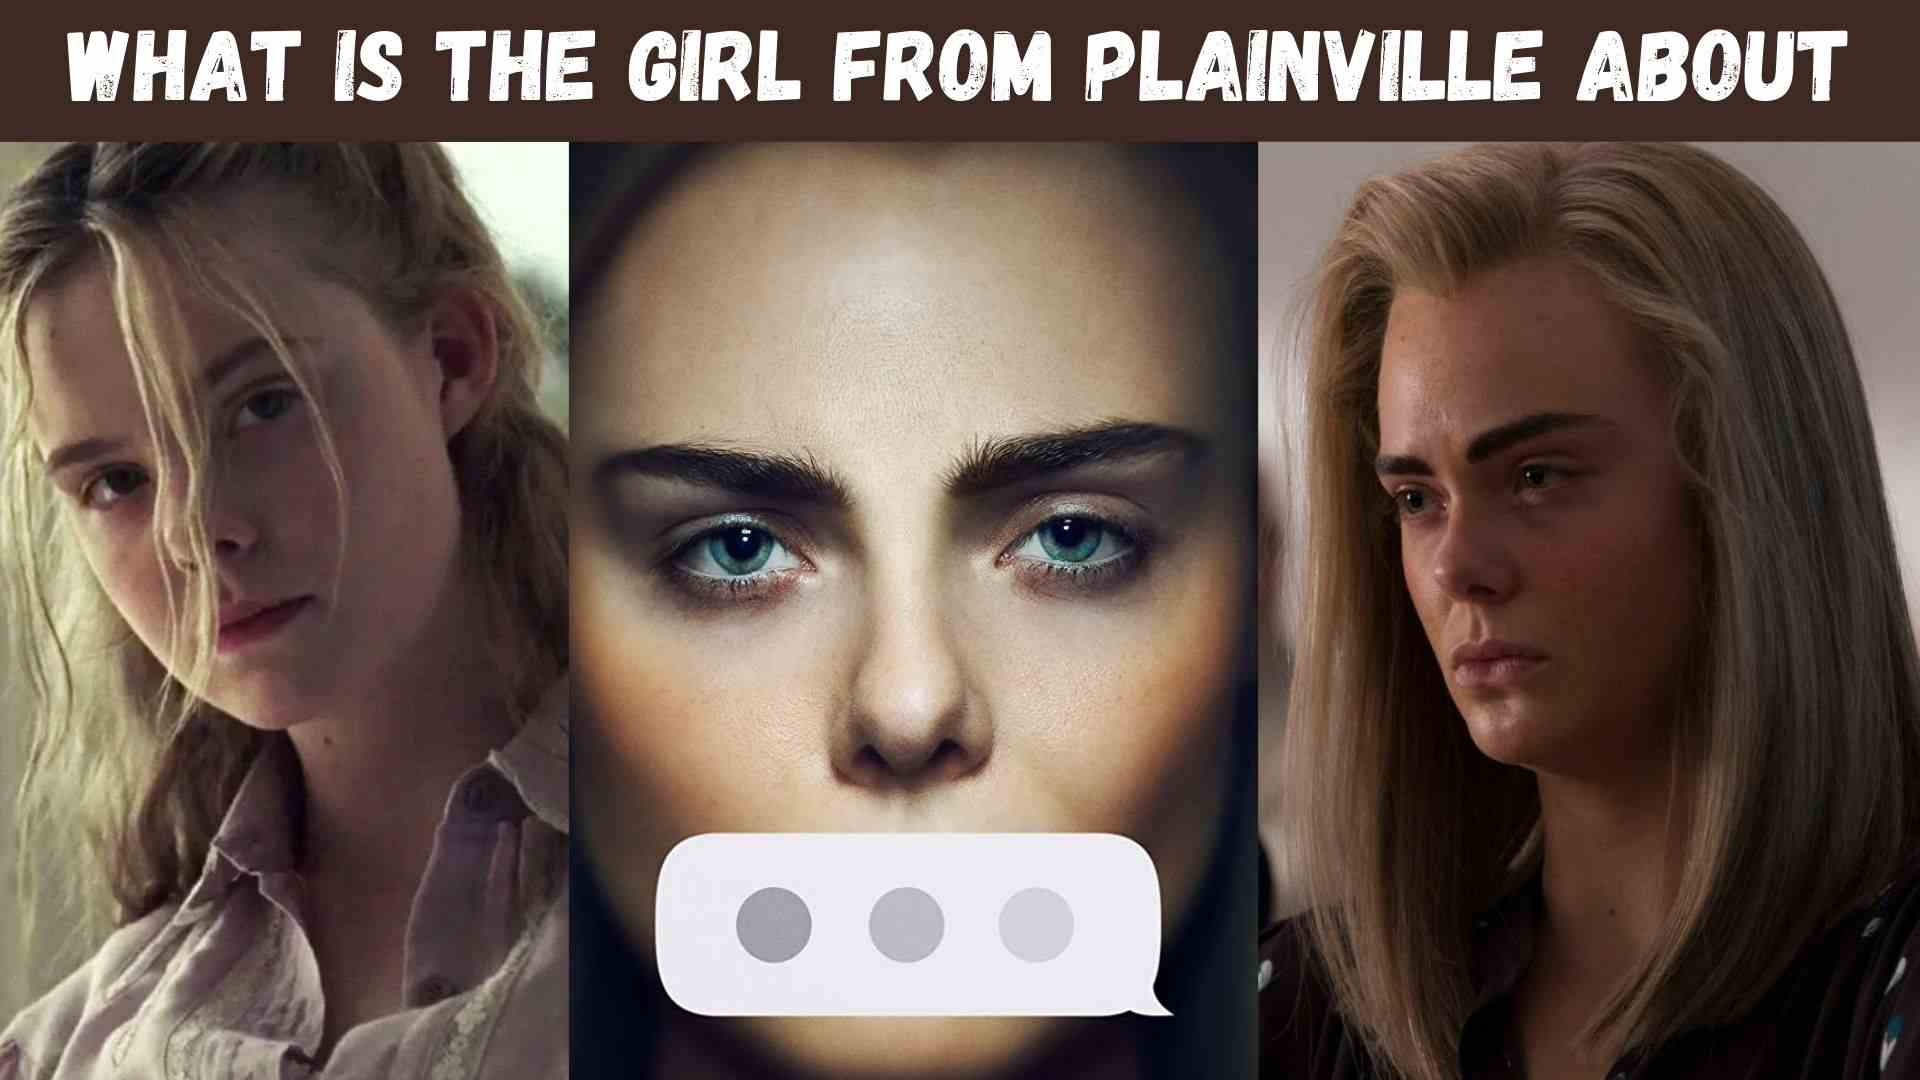 What is The Girl from Plainville about wallpaper and images